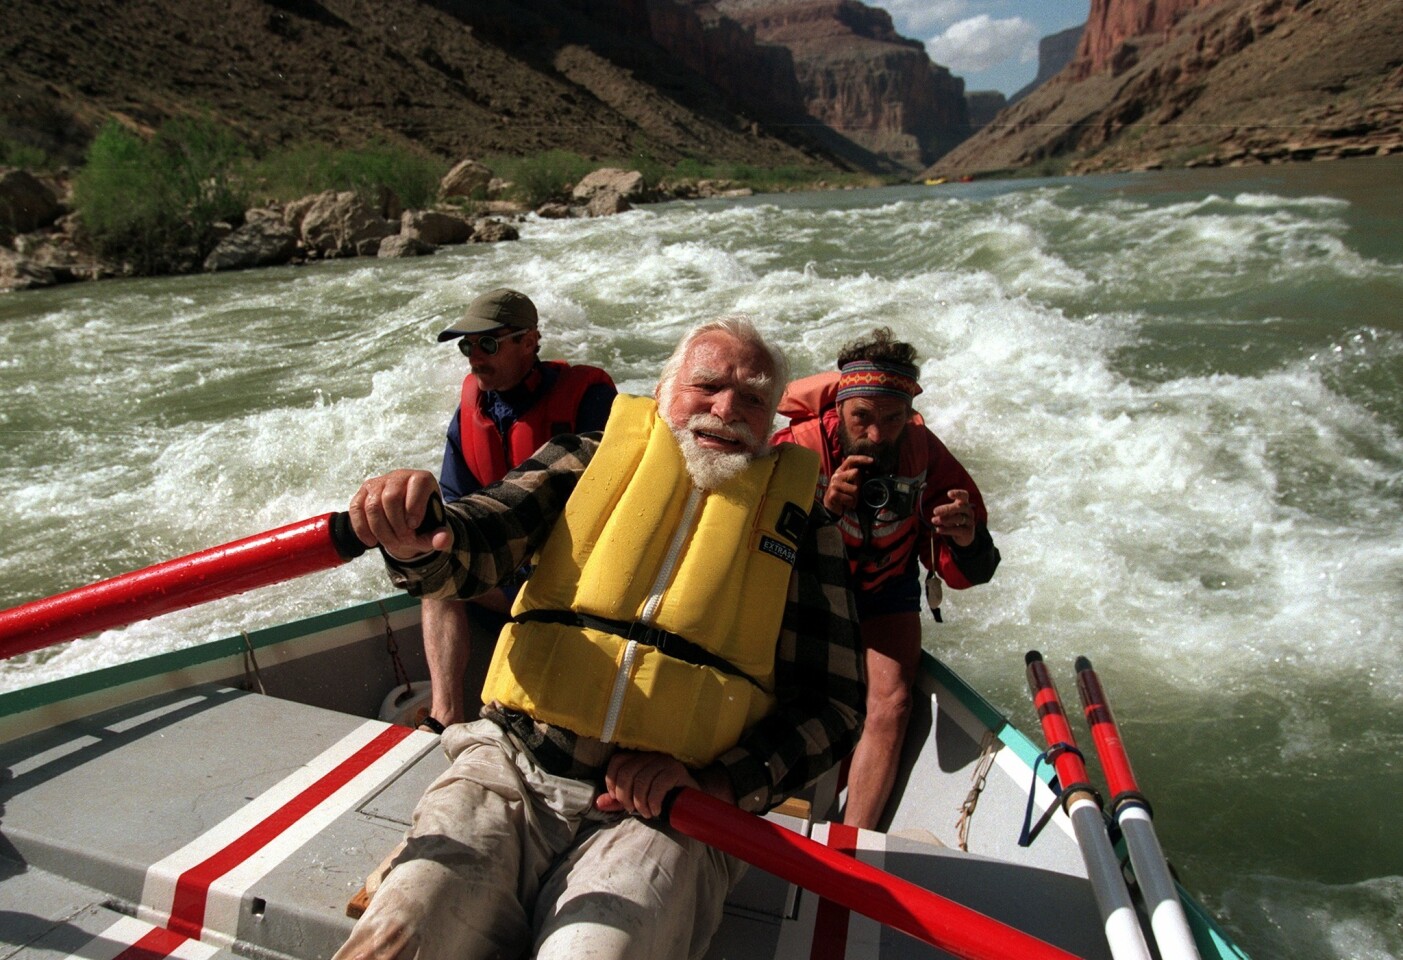 Wilderness advocate Martin Litton, center, a legendary Colorado River guide, navigates the river's 60 Mile Rapid with Lew Steiger, left, and Michael Powers in 1997. Litton died Nov. 30, 2014, at the age of 97.